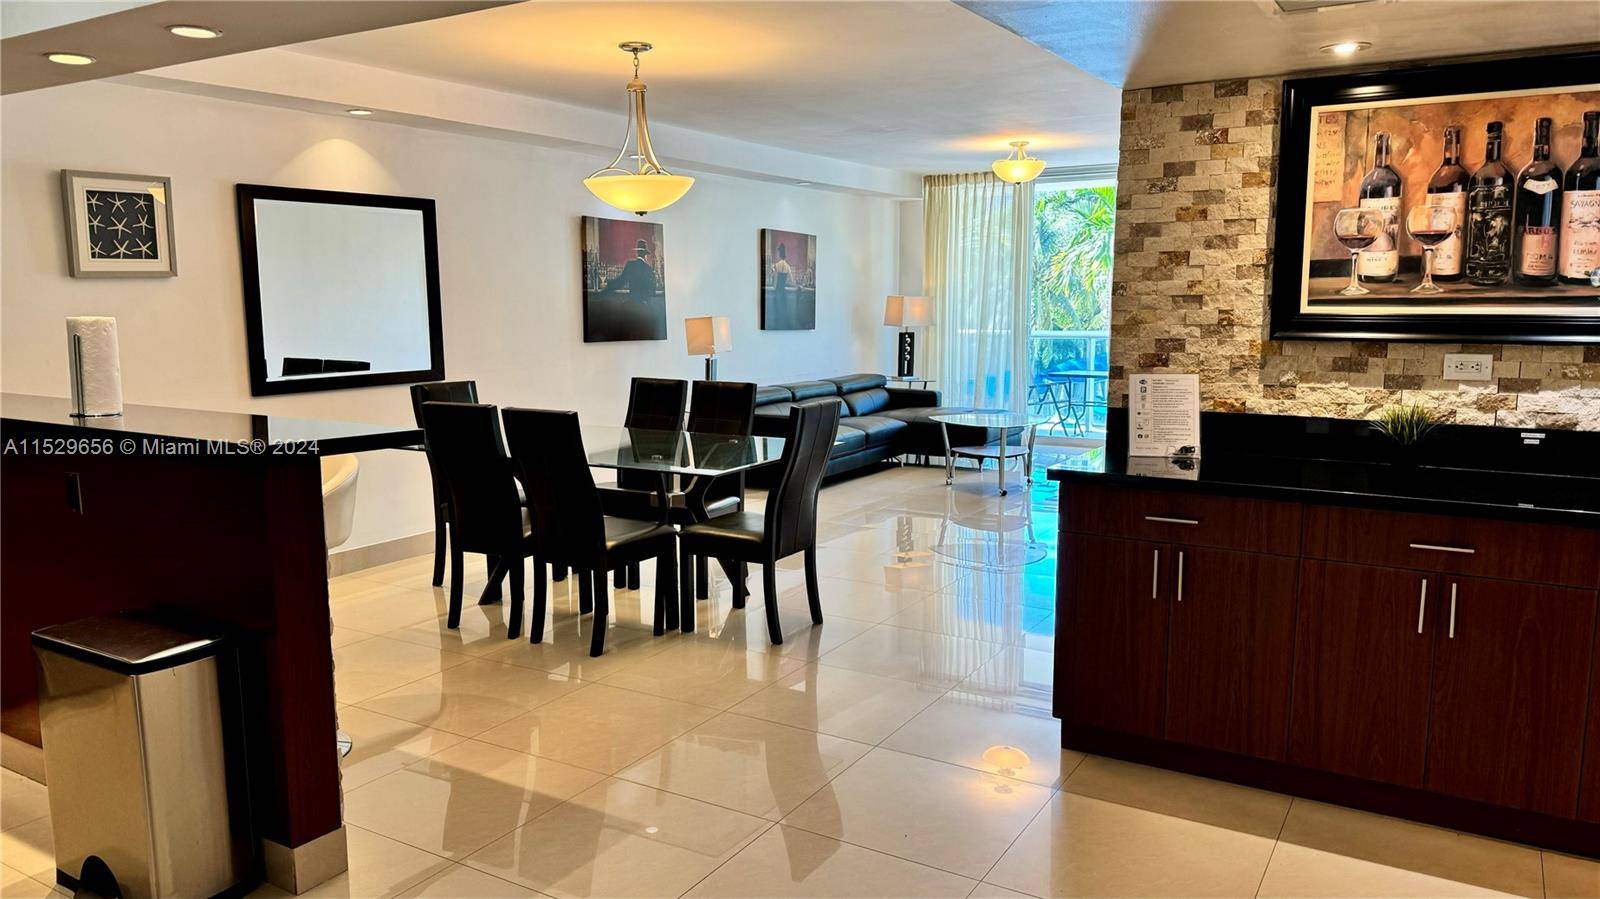 Completely remodel and with beautiful furniture included, Ideally situated between the Atlantic and the Intracoastal right across from 2.